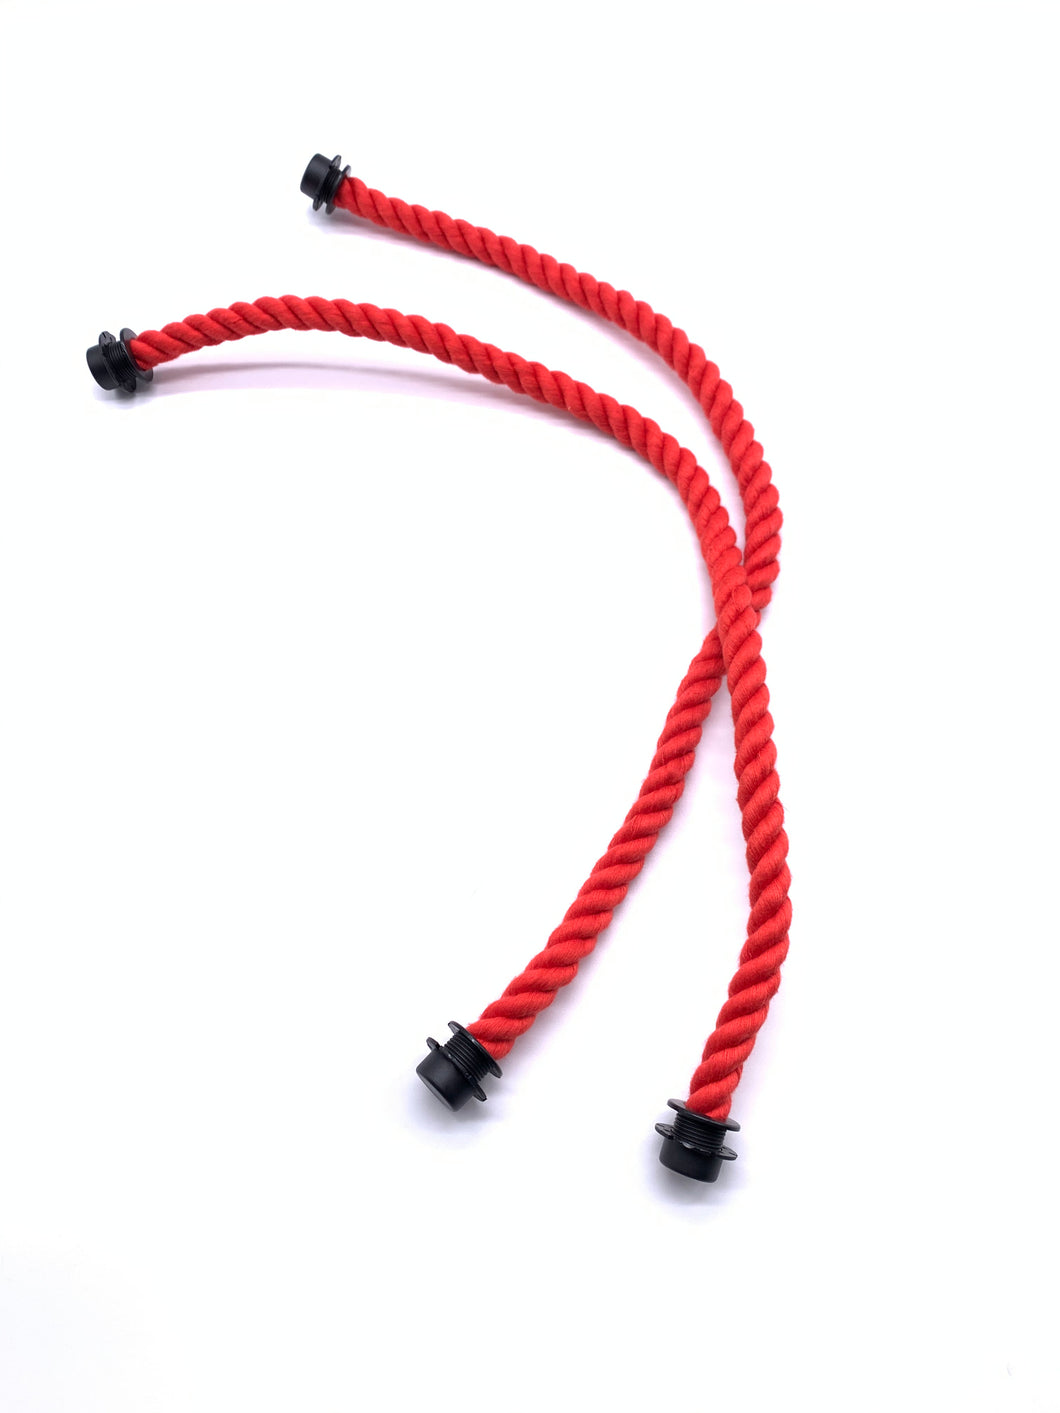 Be Me Bag Handles - Red Ropes